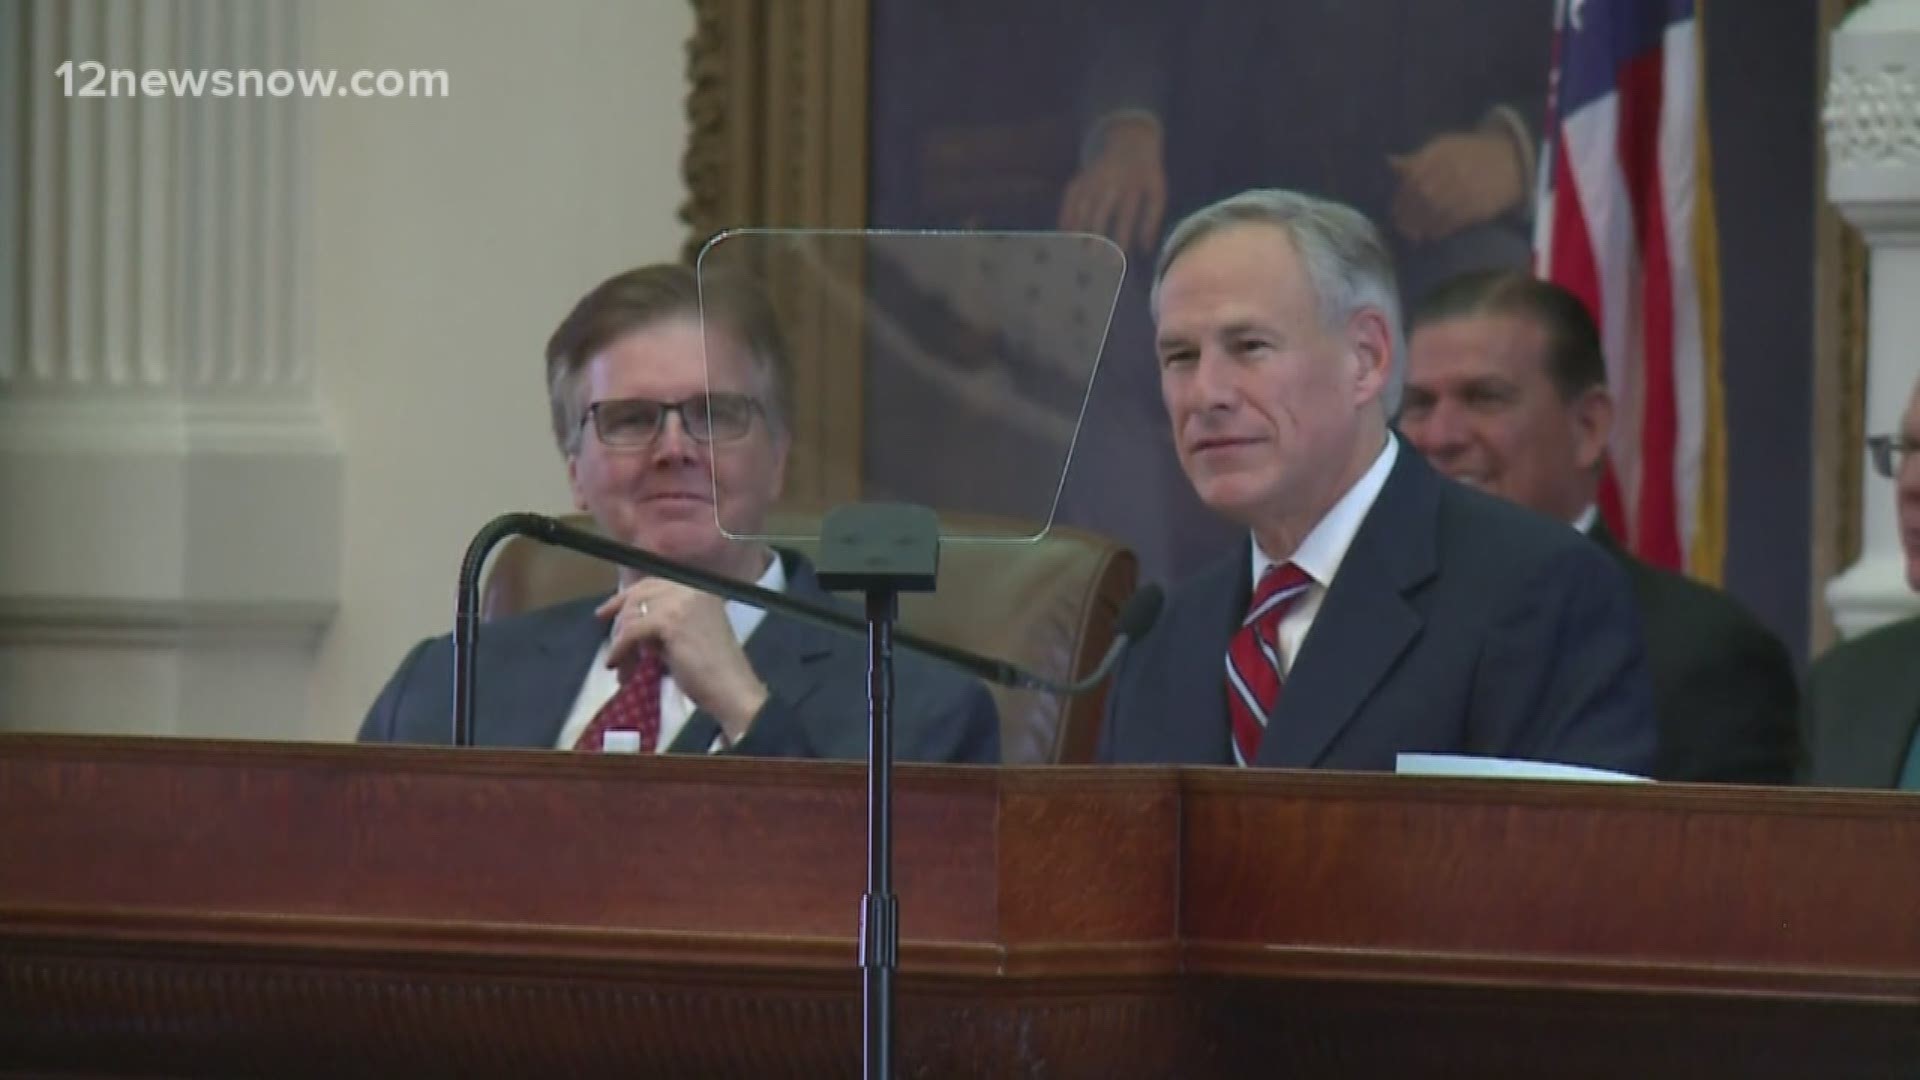 Governor Abbott lays out his emergency items during the State of the State Address, which include school finance and property tax reforms, calling for unity among parties working on both of the ideas.